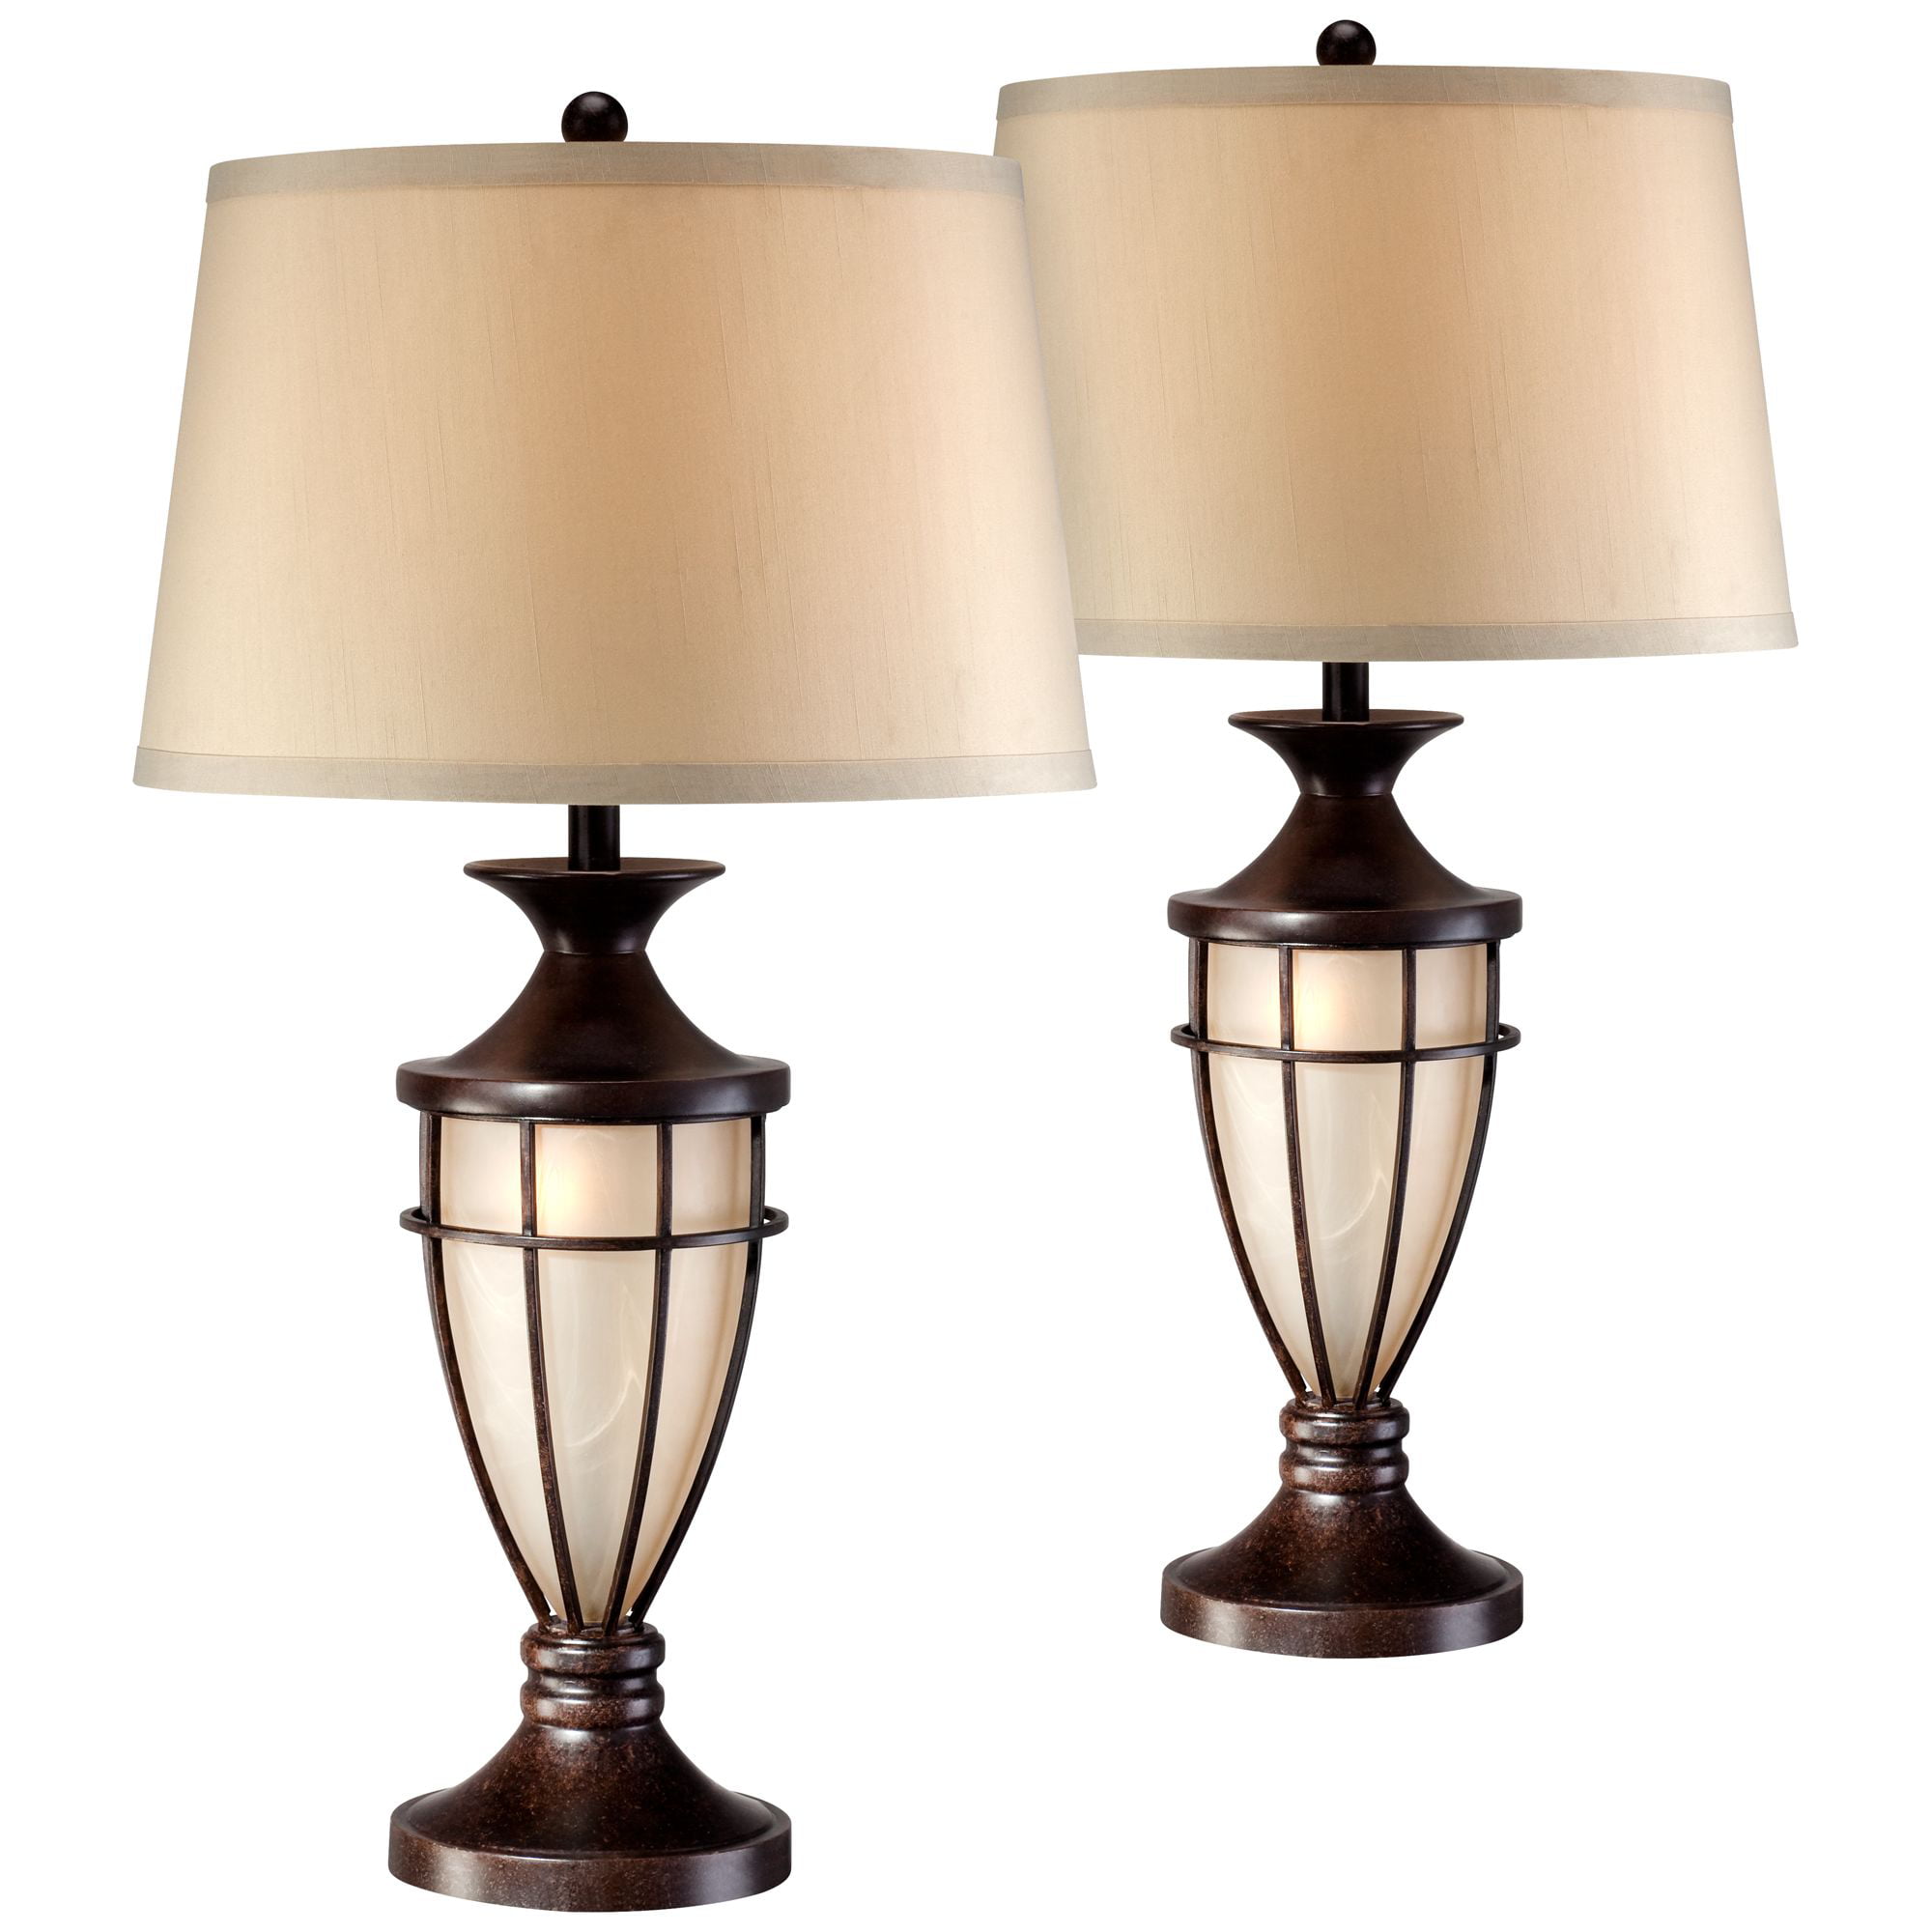 John Timberland Traditional Table Lamps Set of 2 with